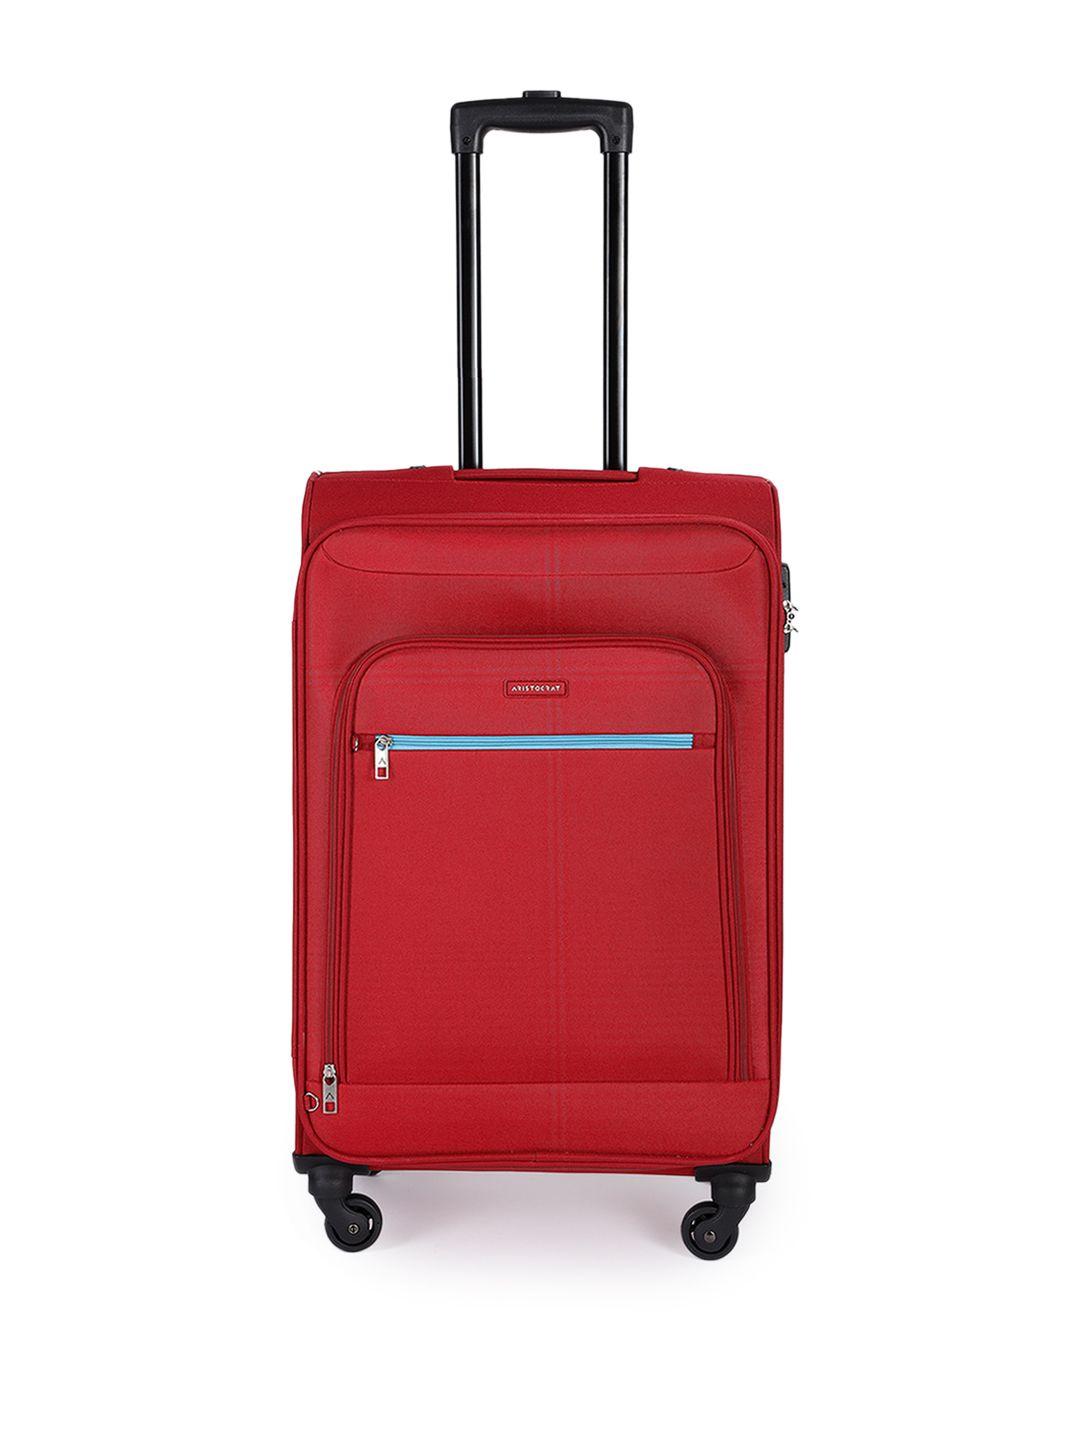 Aristocrat Red Solid NILE 4W EXP STROLLY 66 Medium Trolley Suitcase